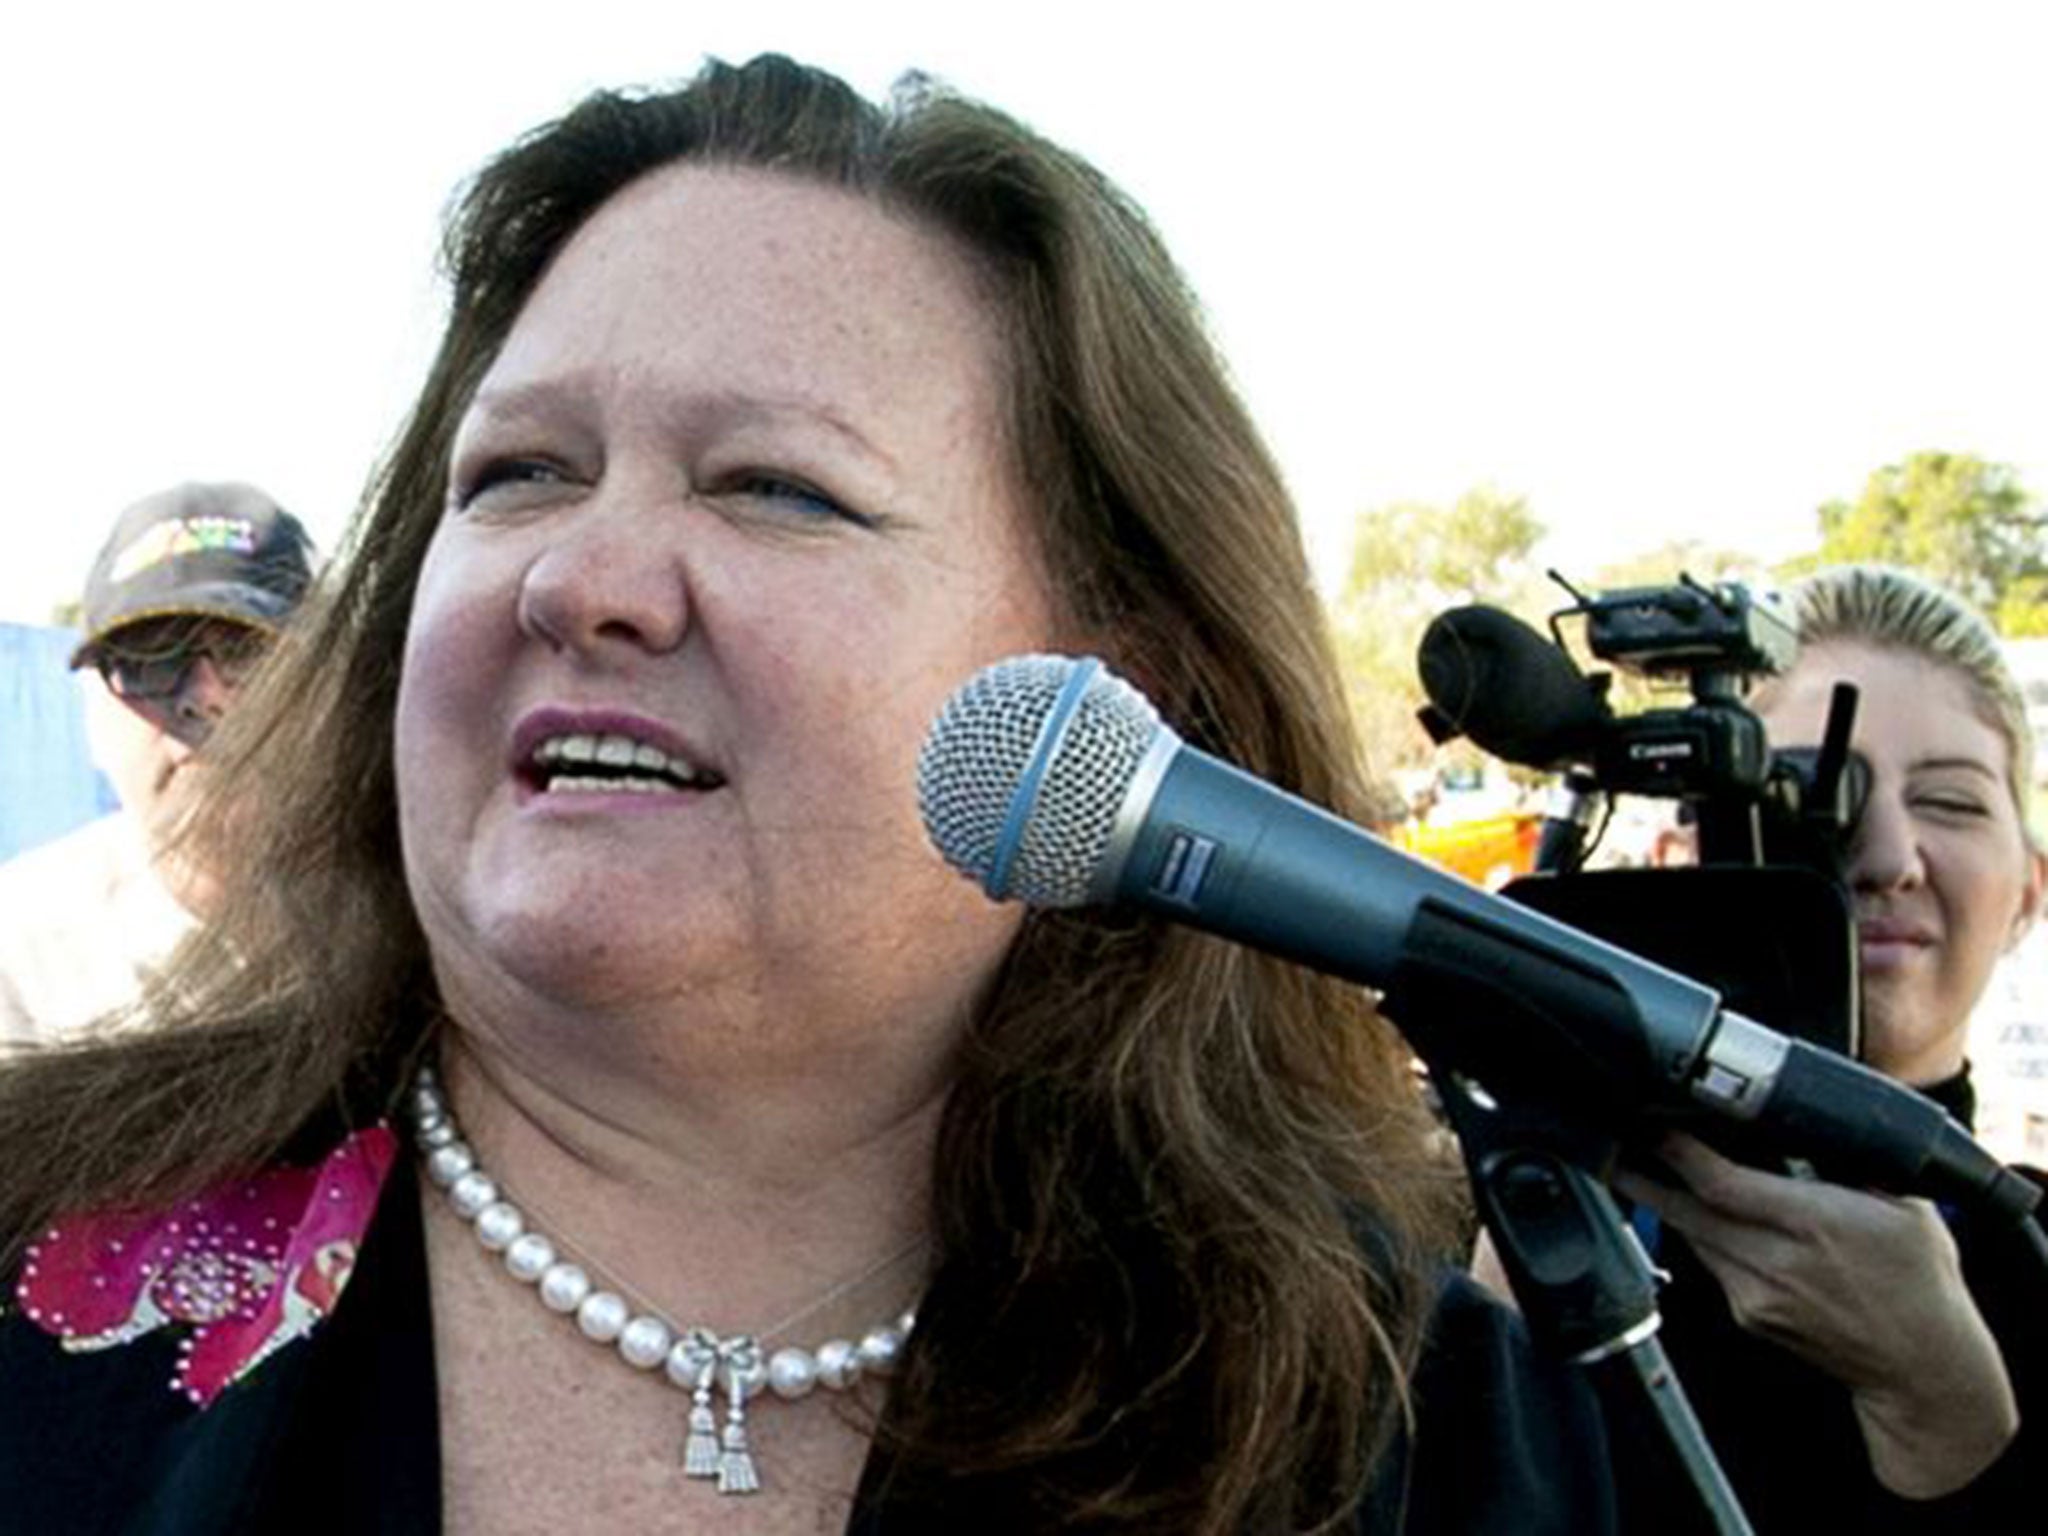 Gina Rinehart, Australia's richest person, has lost a long-running court battle for control of a multi-billion-dollar family trust